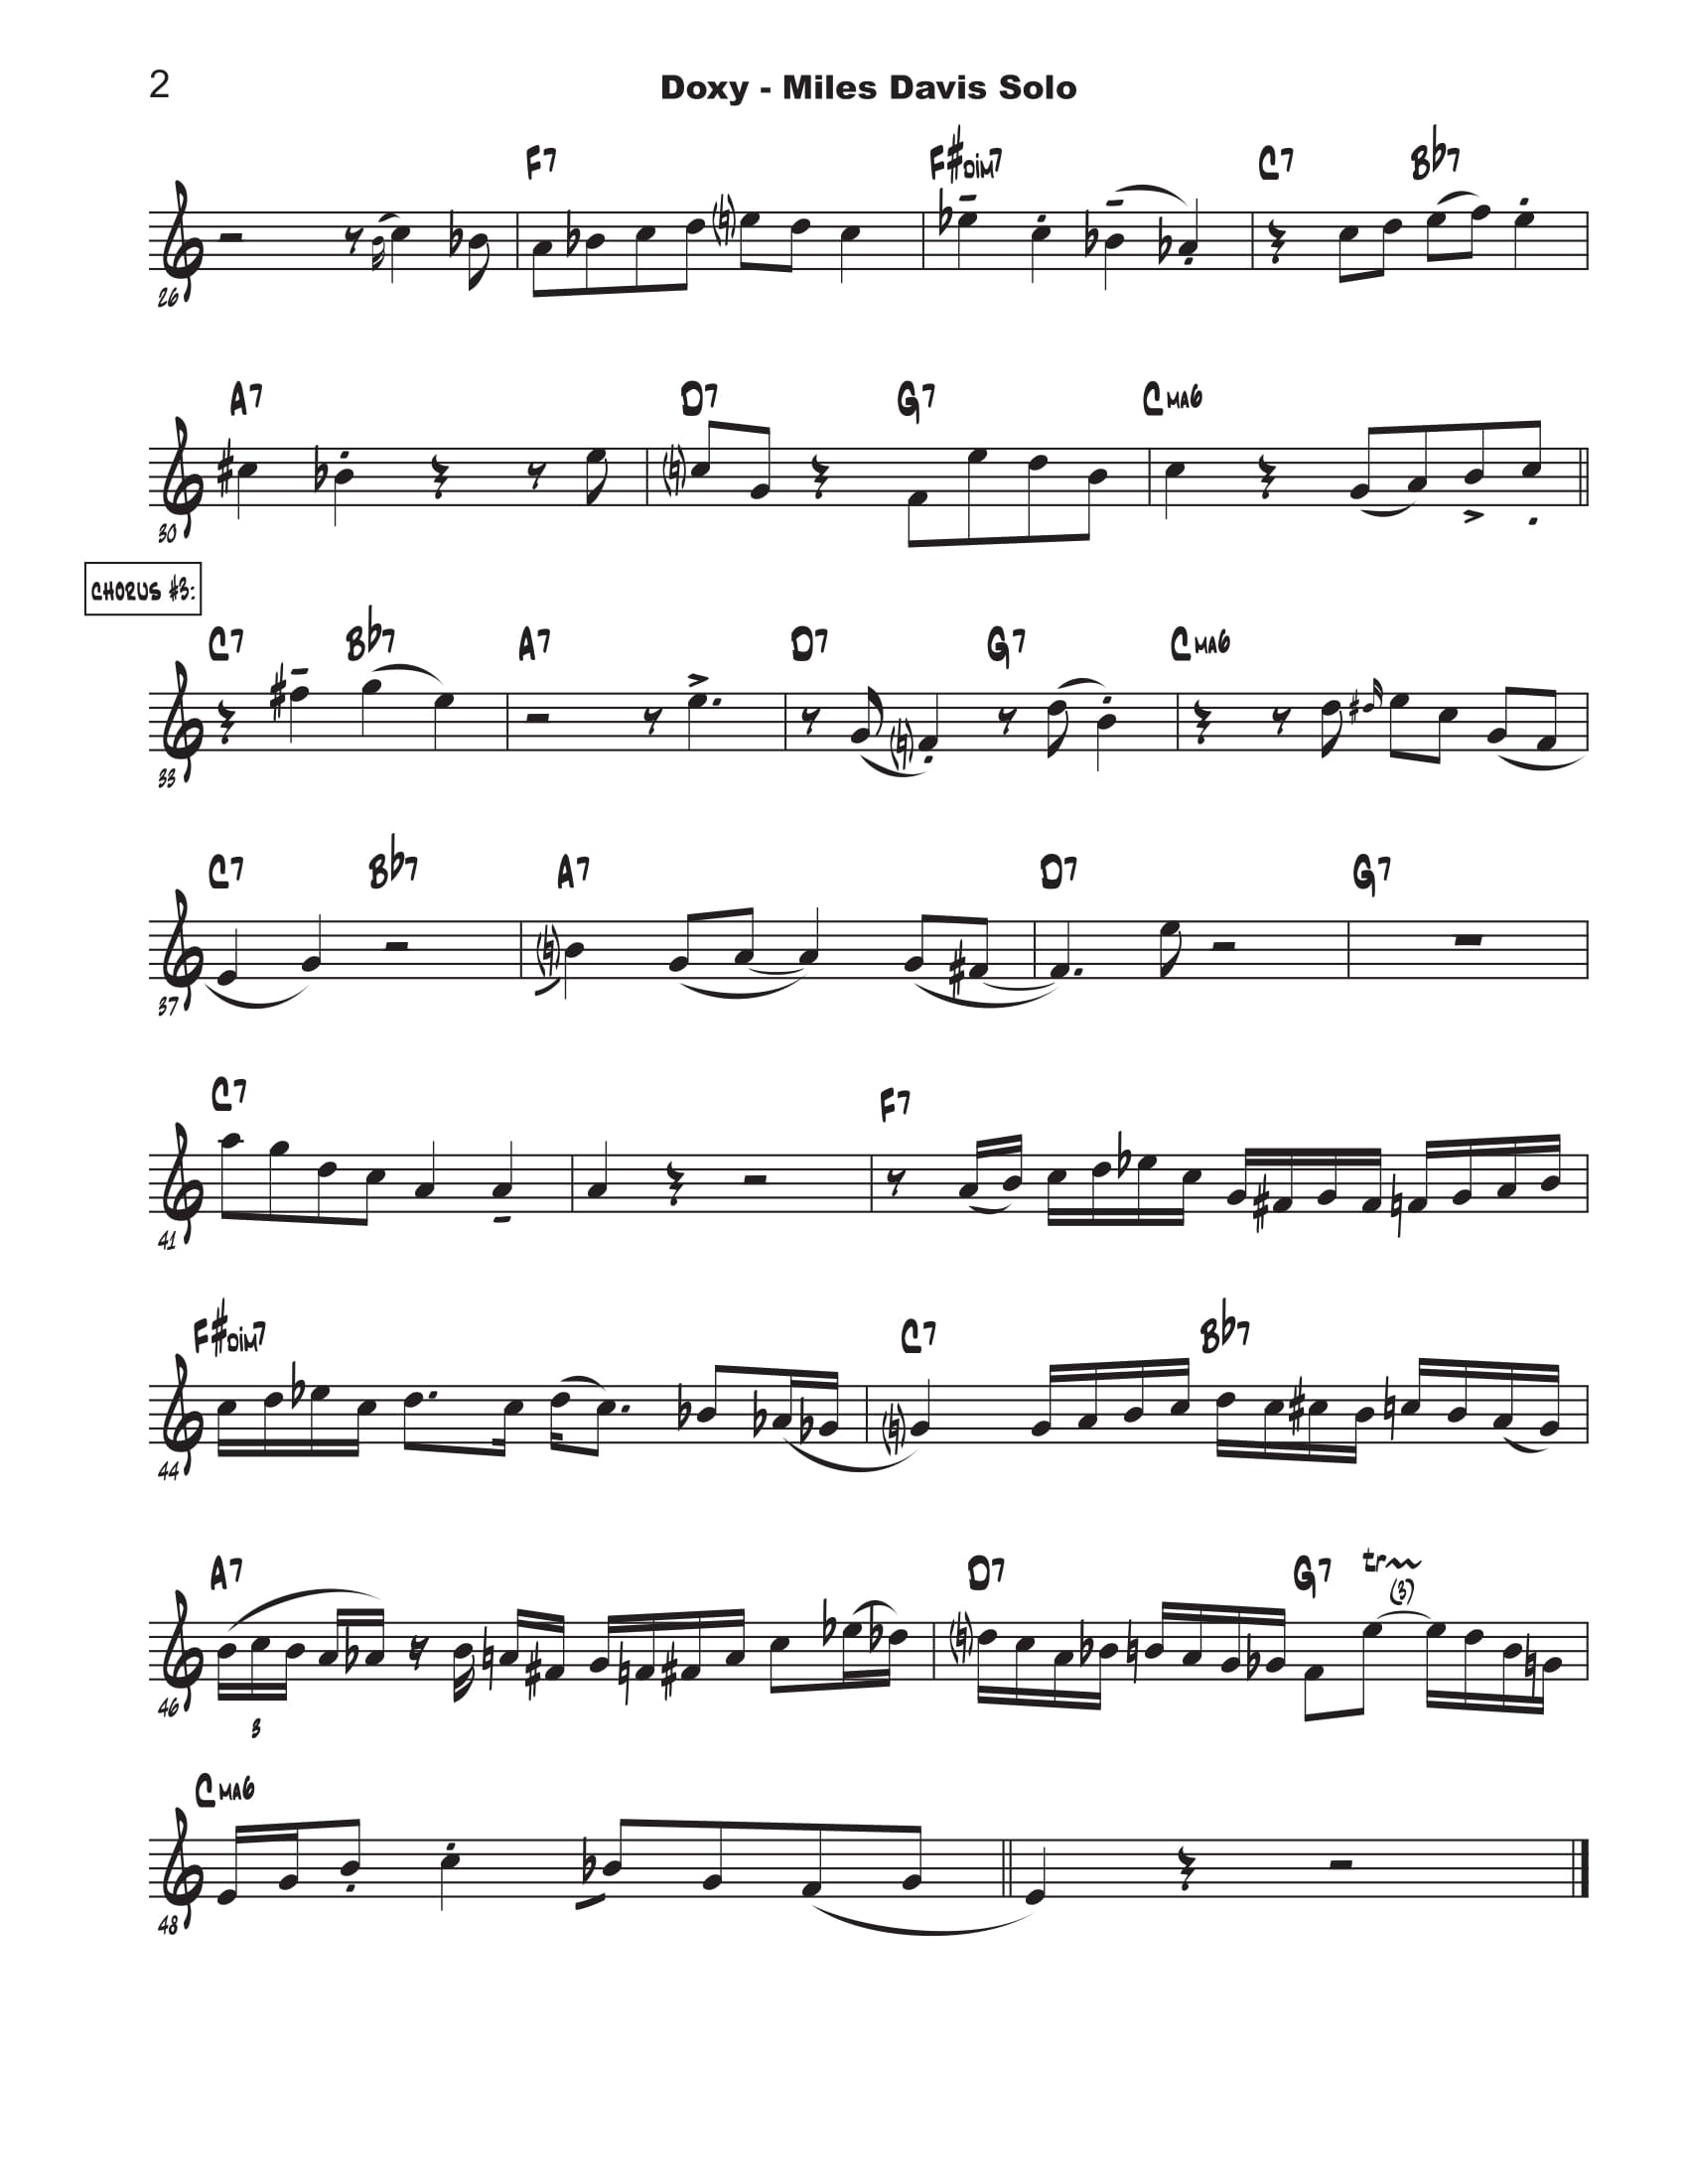 A Miles Davis solo transcription of "Doxy." for trumpet, recorded in 1954. (Page 2 of 2)